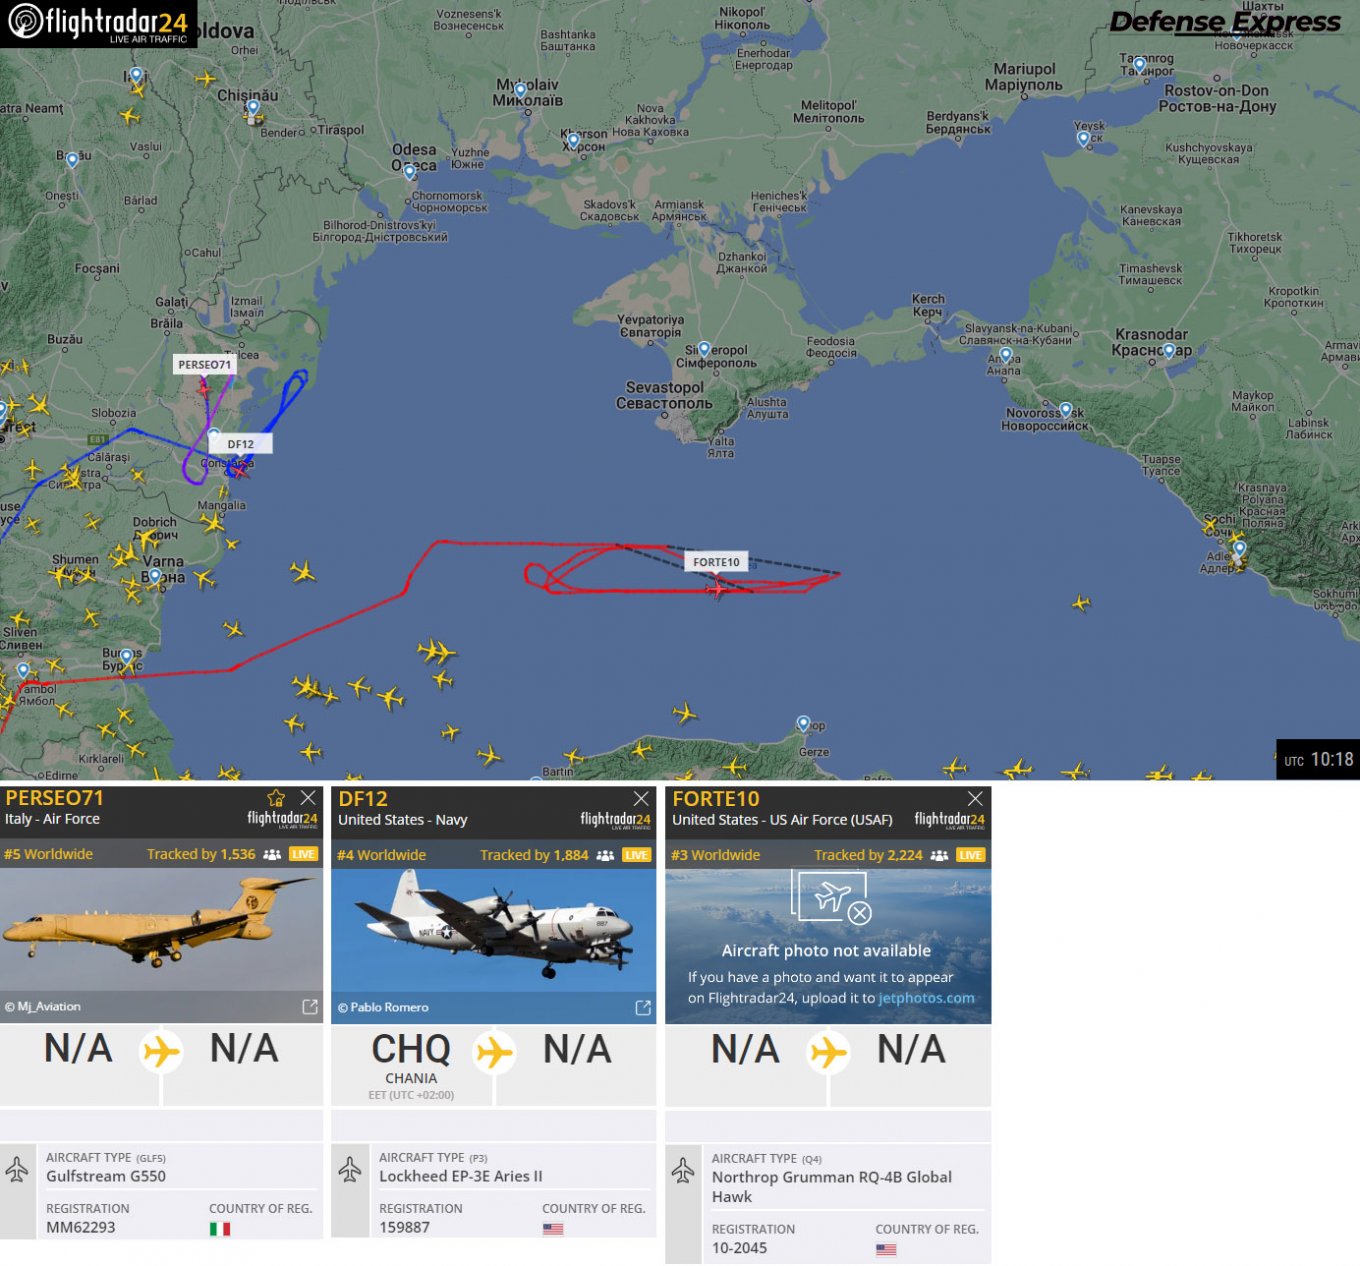 Reconnaissance and radio surveillance aircraft of NATO aliies to watch over the russian Black Sea Fleet